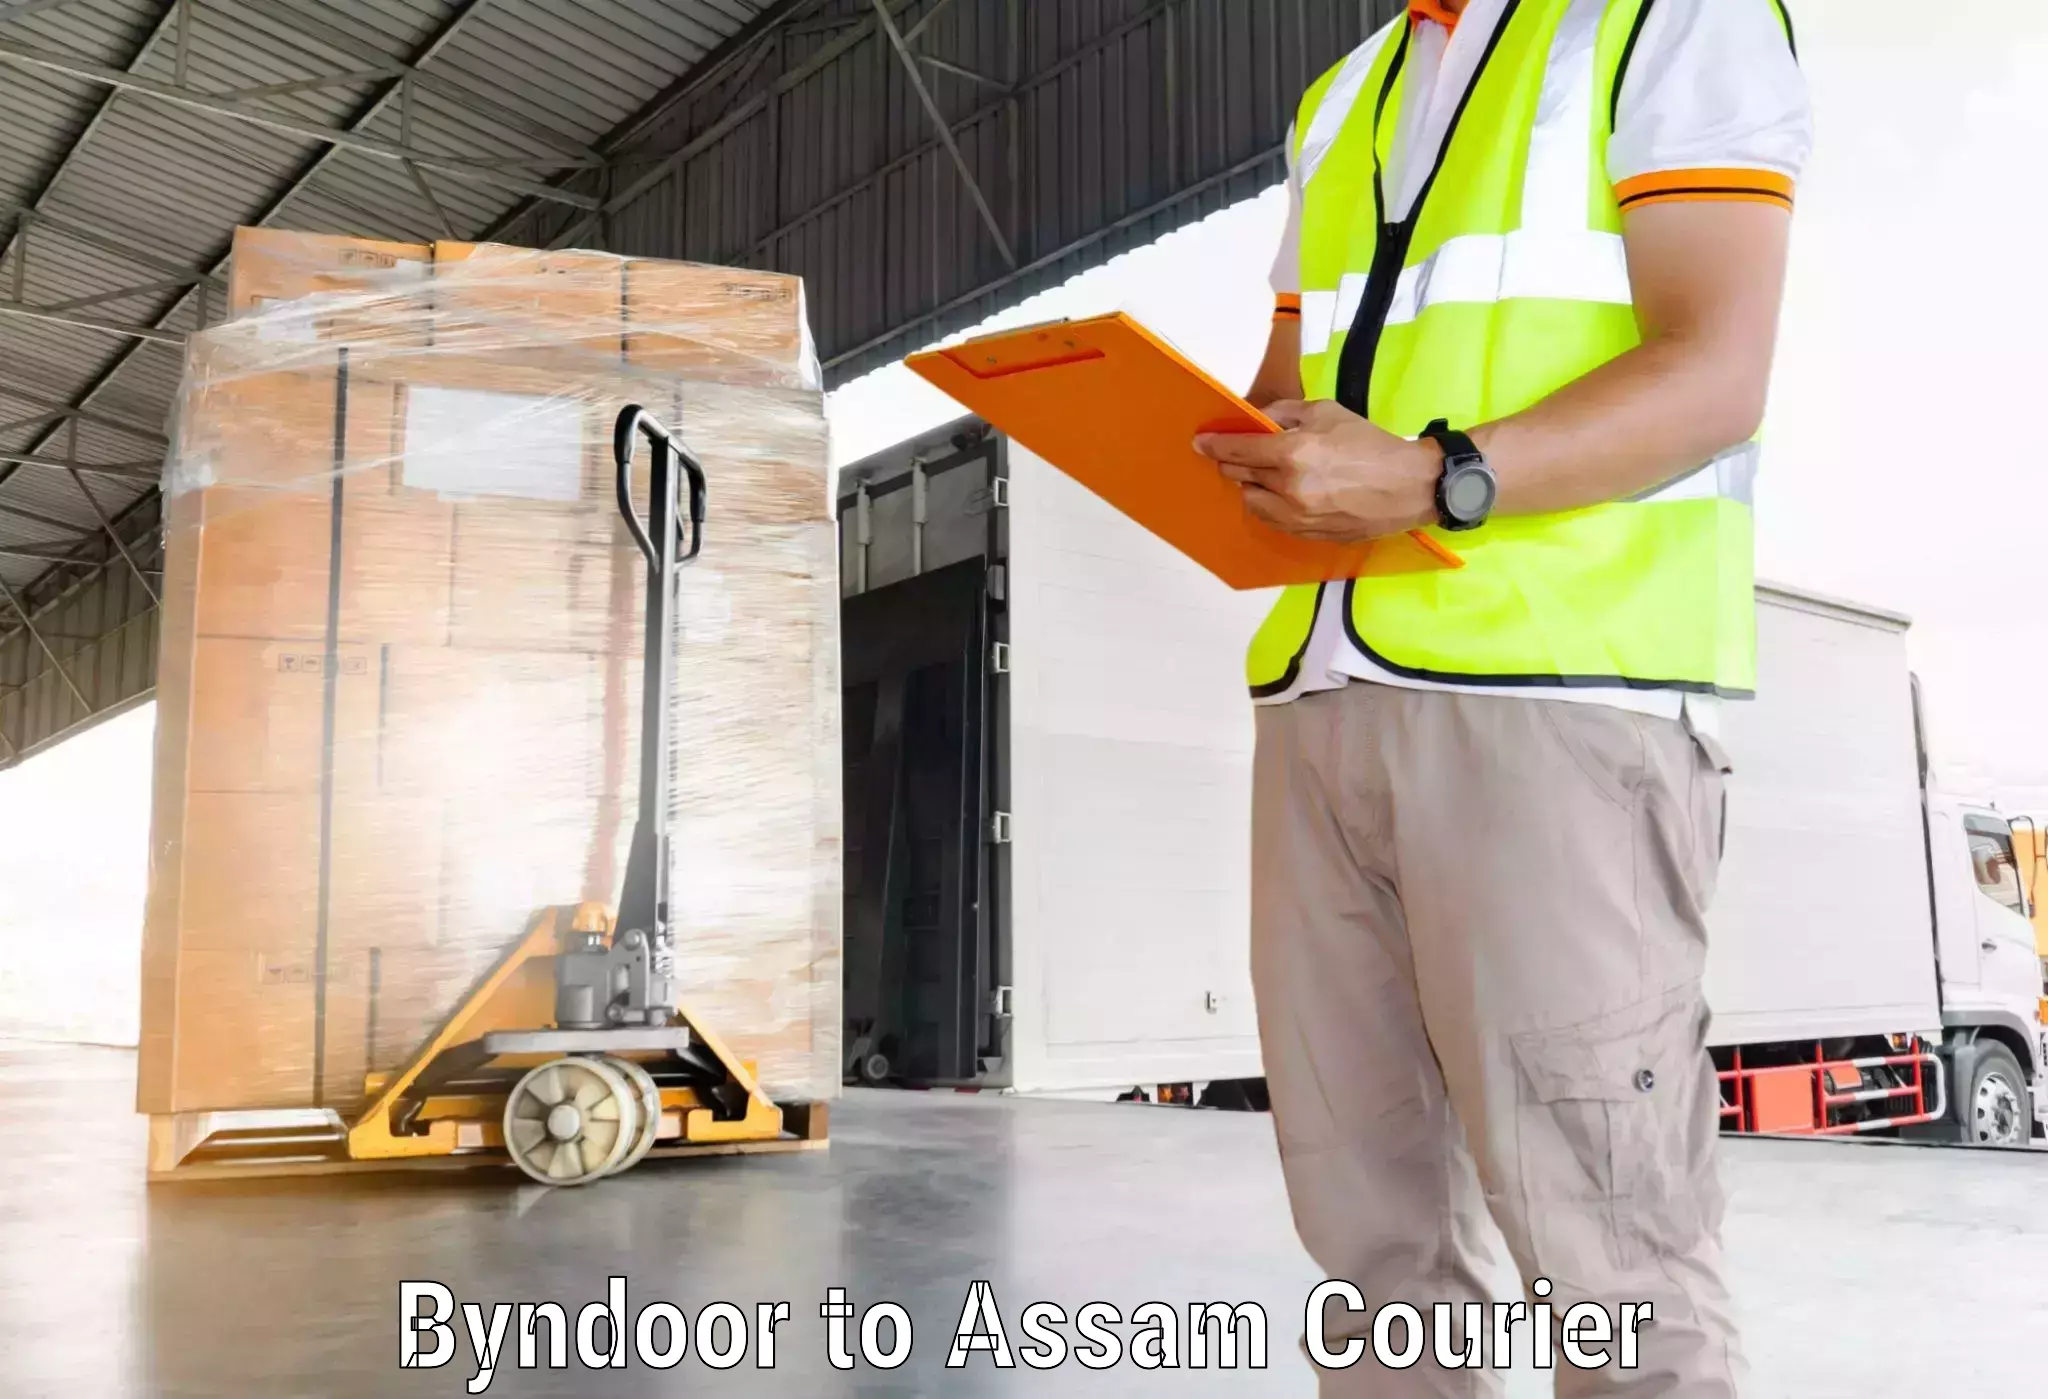 Customer-centric shipping in Byndoor to Kampur